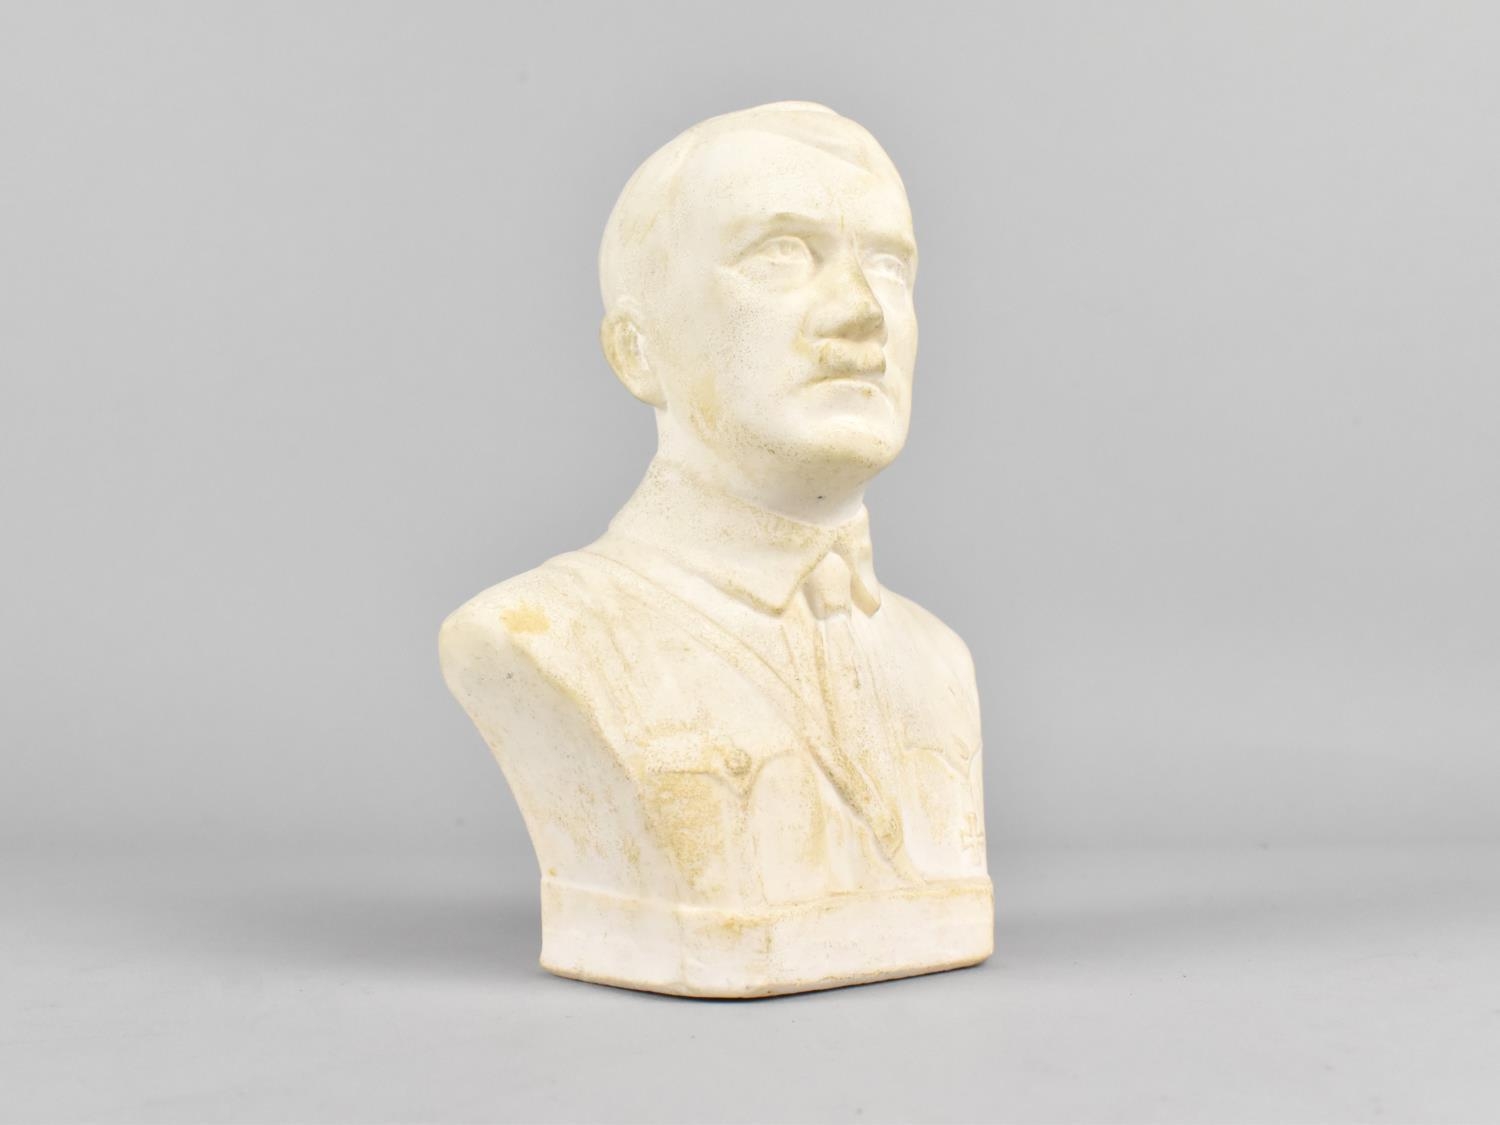 A Cast Reconstituted Stone Bust of Hitler, 17cms High